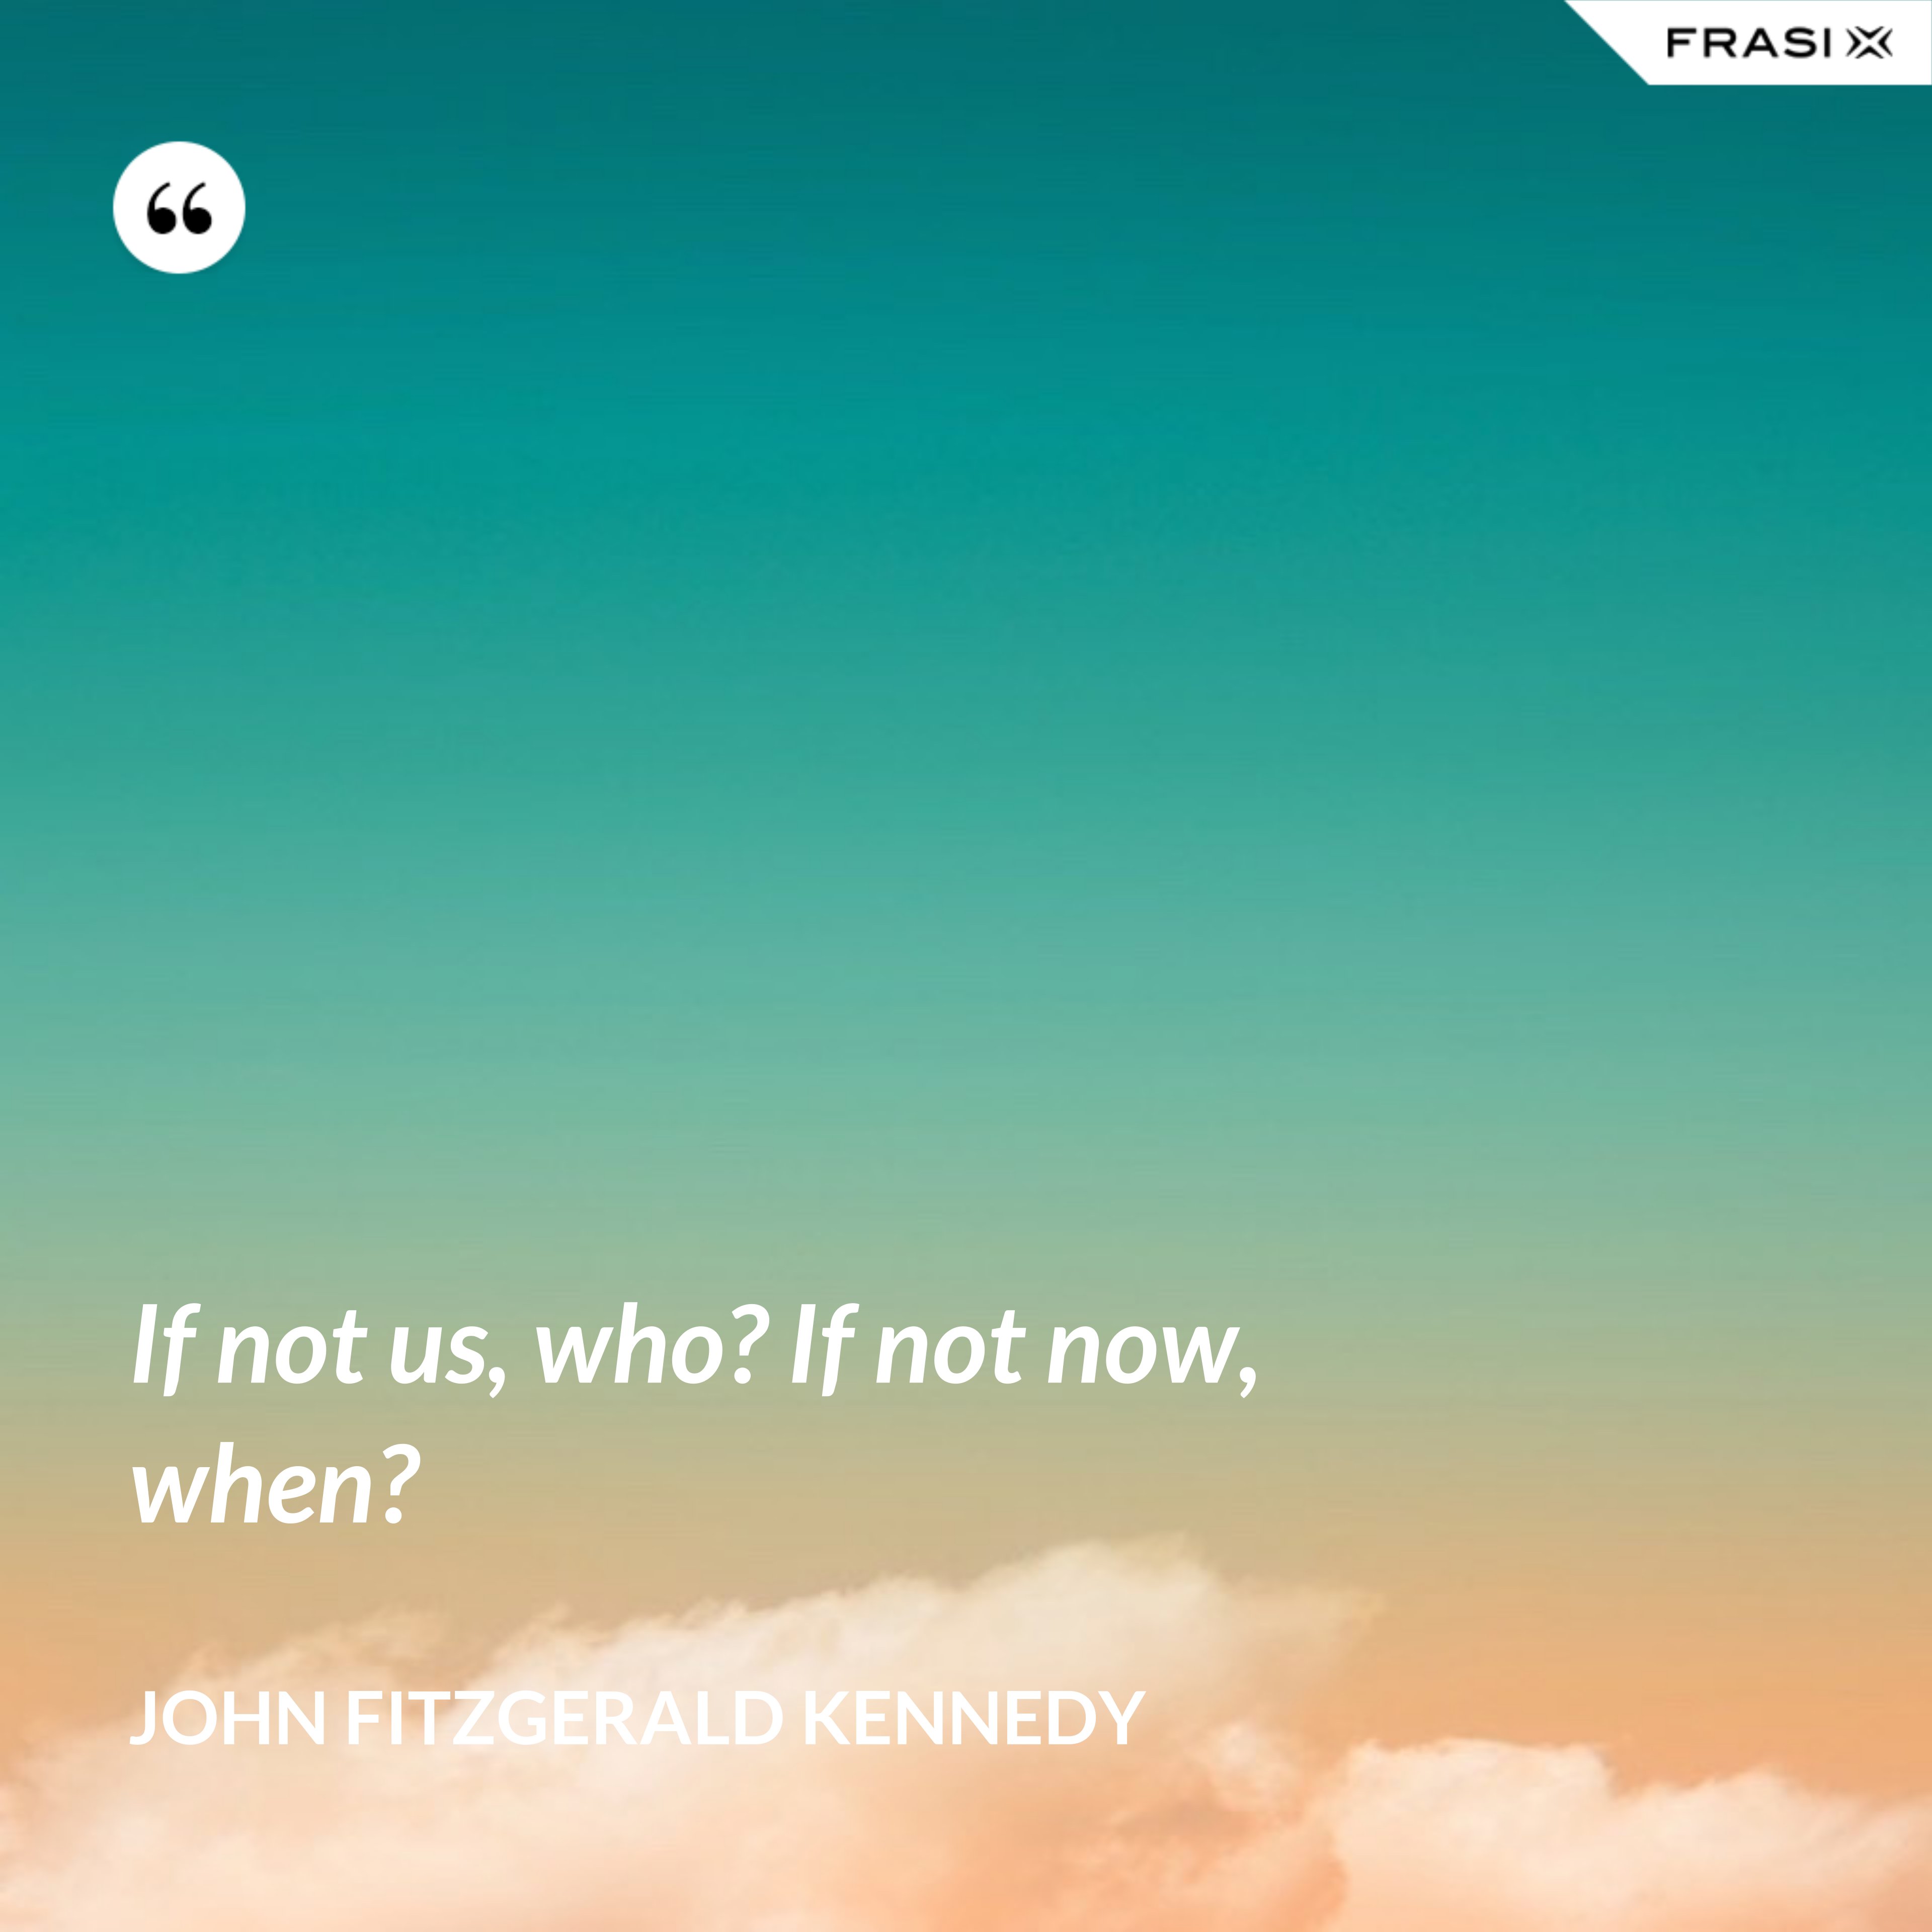 If not us, who? If not now, when? - John Fitzgerald Kennedy